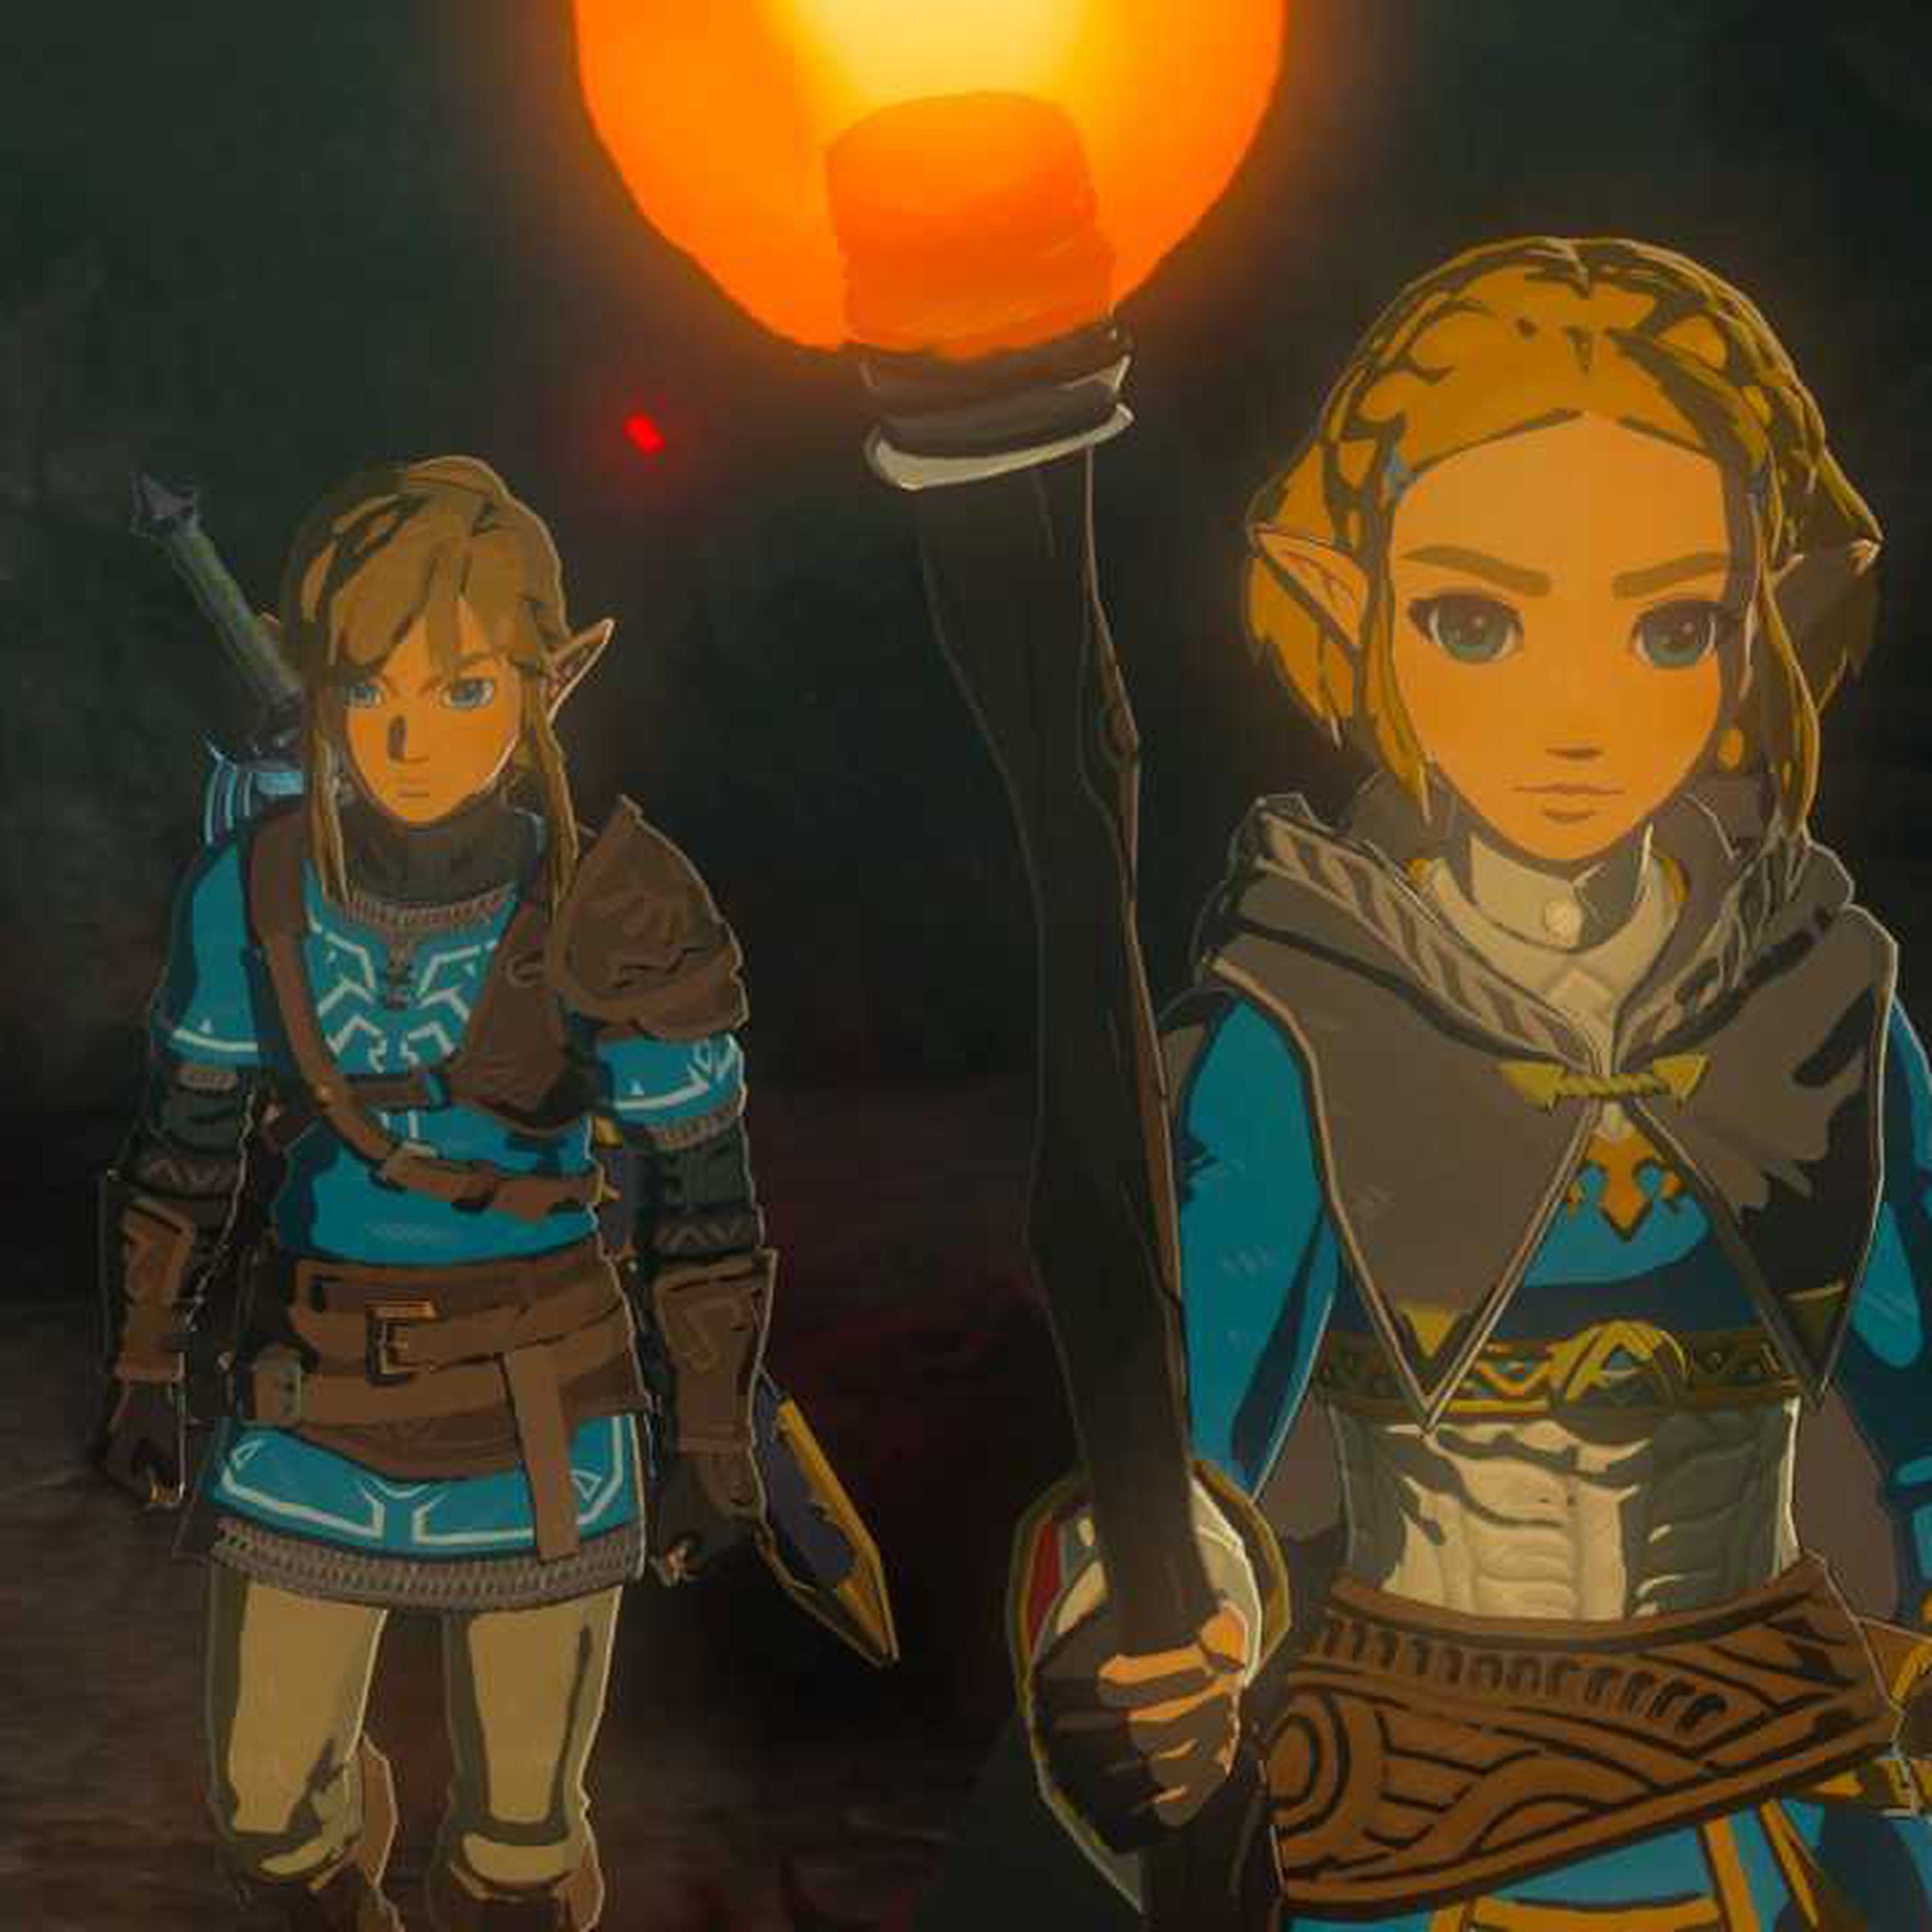 Screenshot from Tears of the Kingdom featuring Link and Zelda exploring a dark, torchlit cave